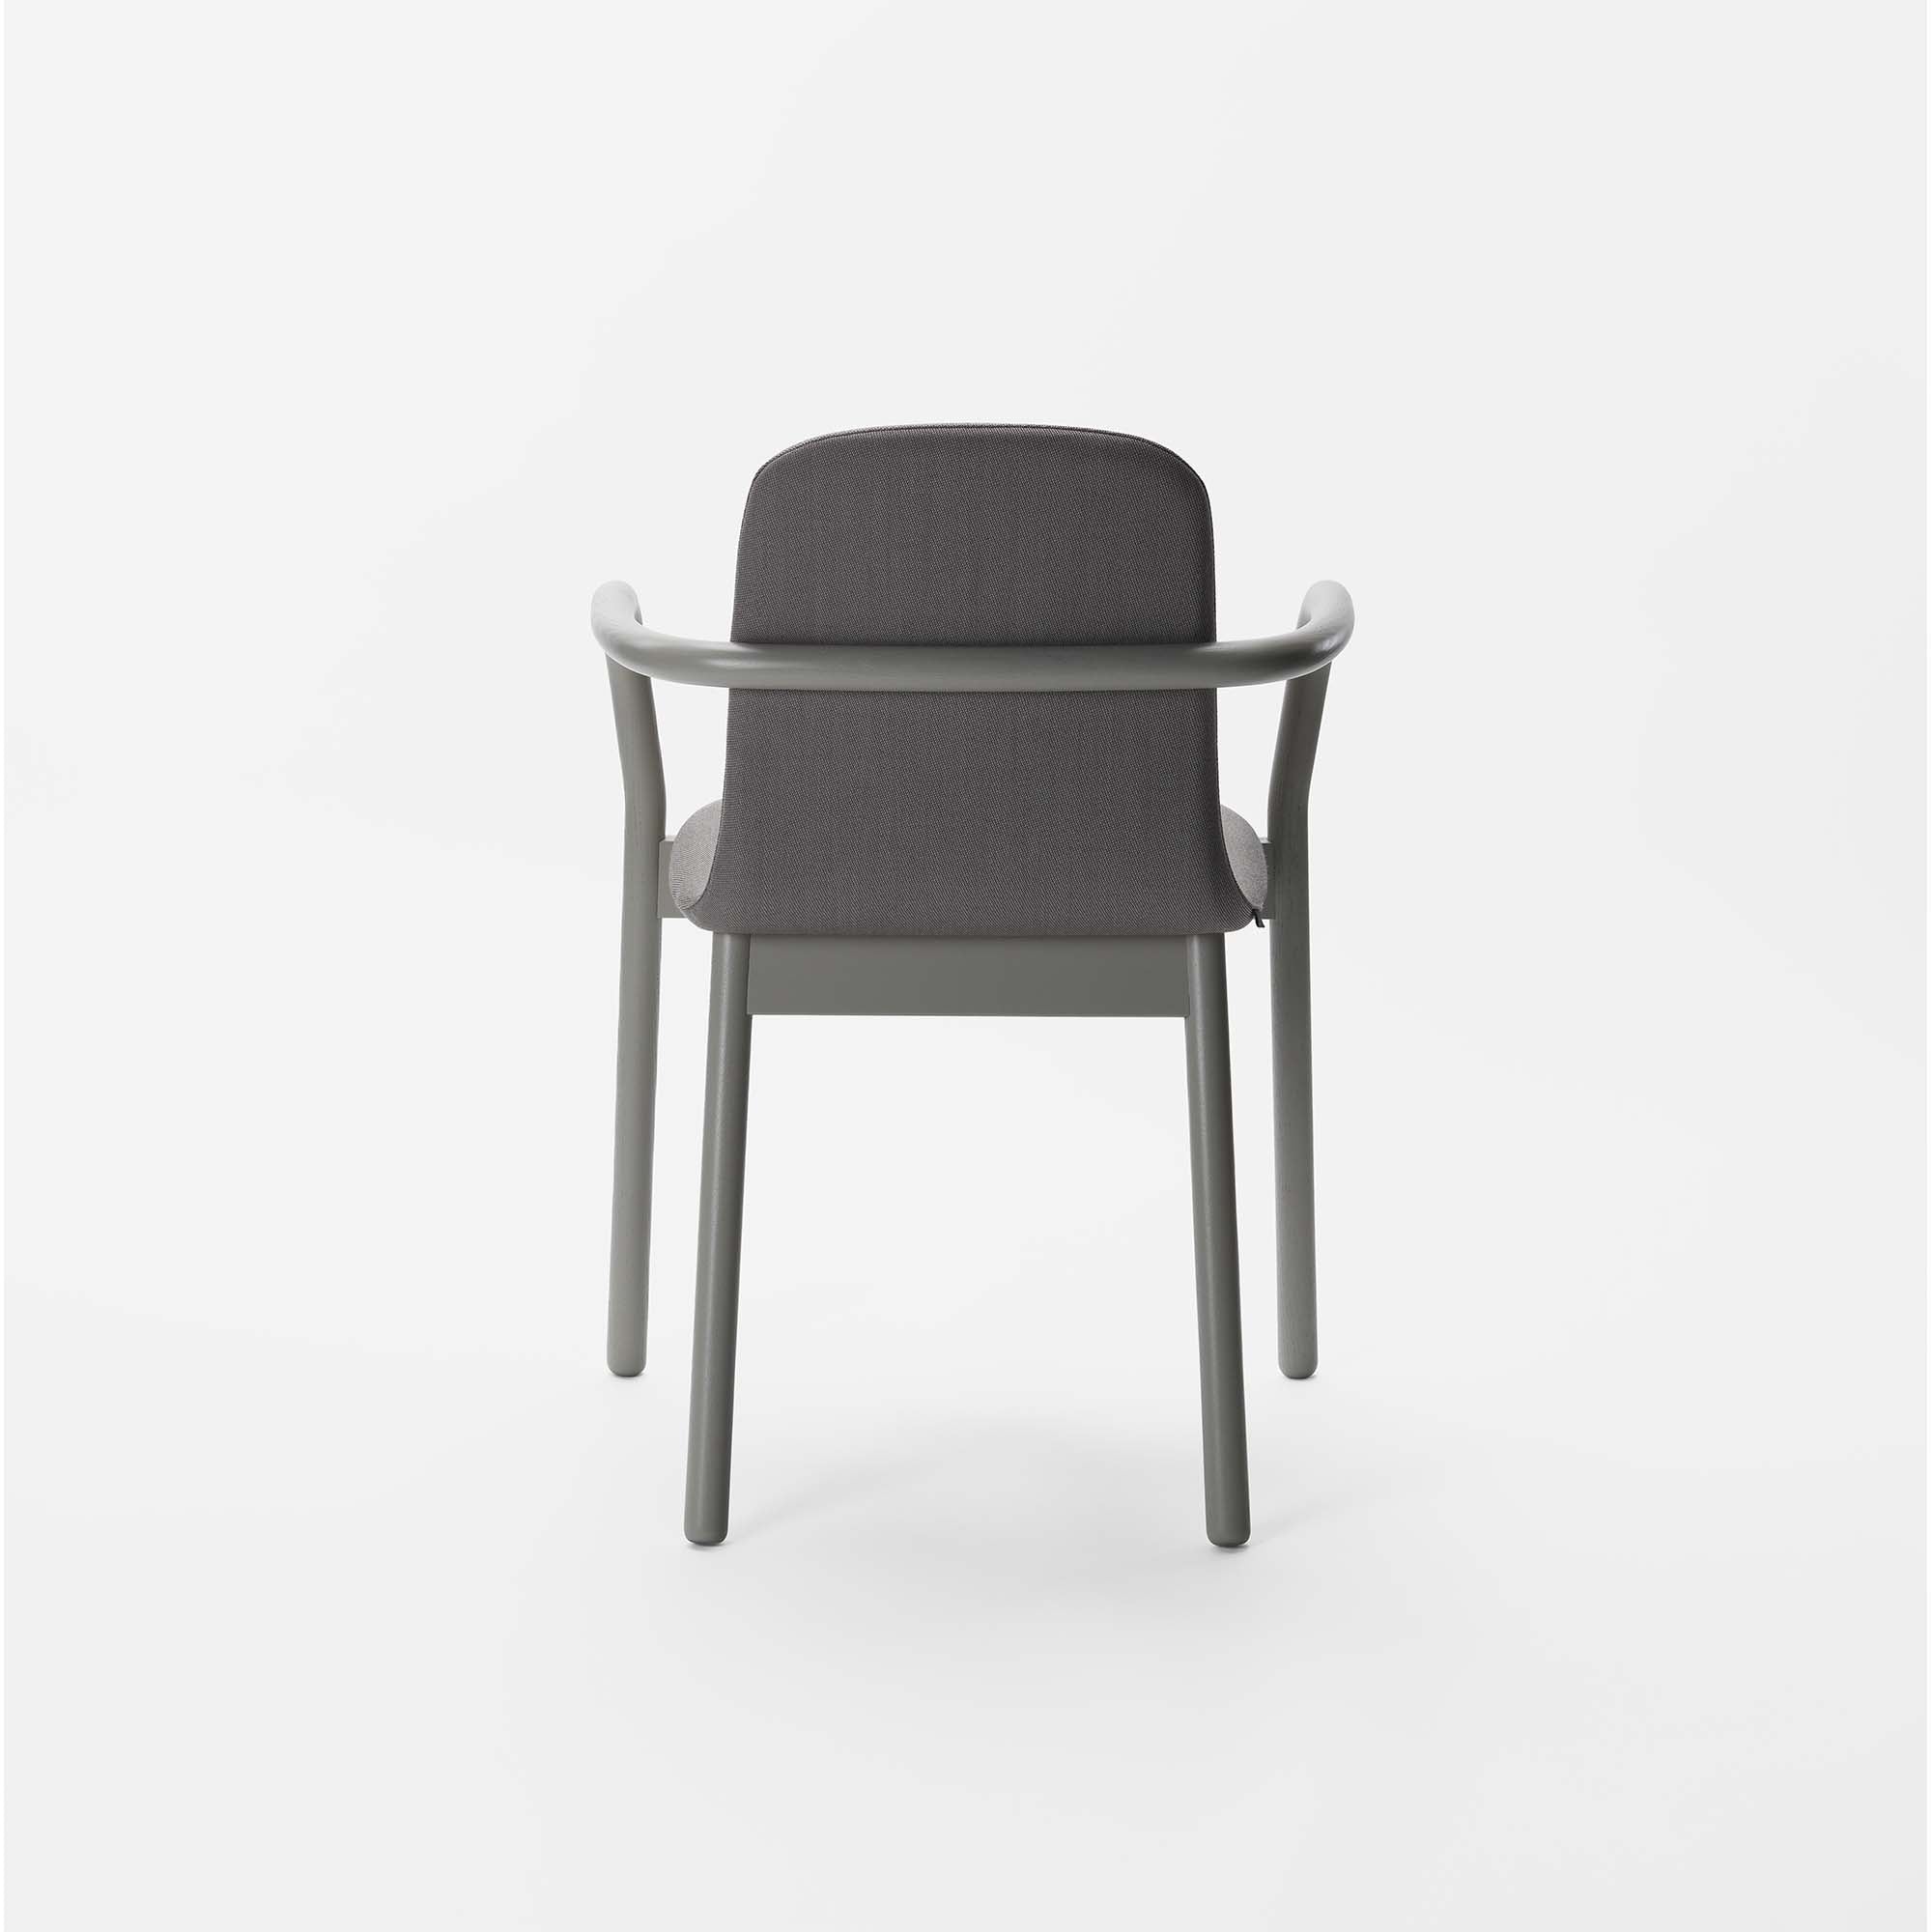 HUG ARMCHAIR Lacquered Ash in Pebble Gray-Kvadrat Rime back side view